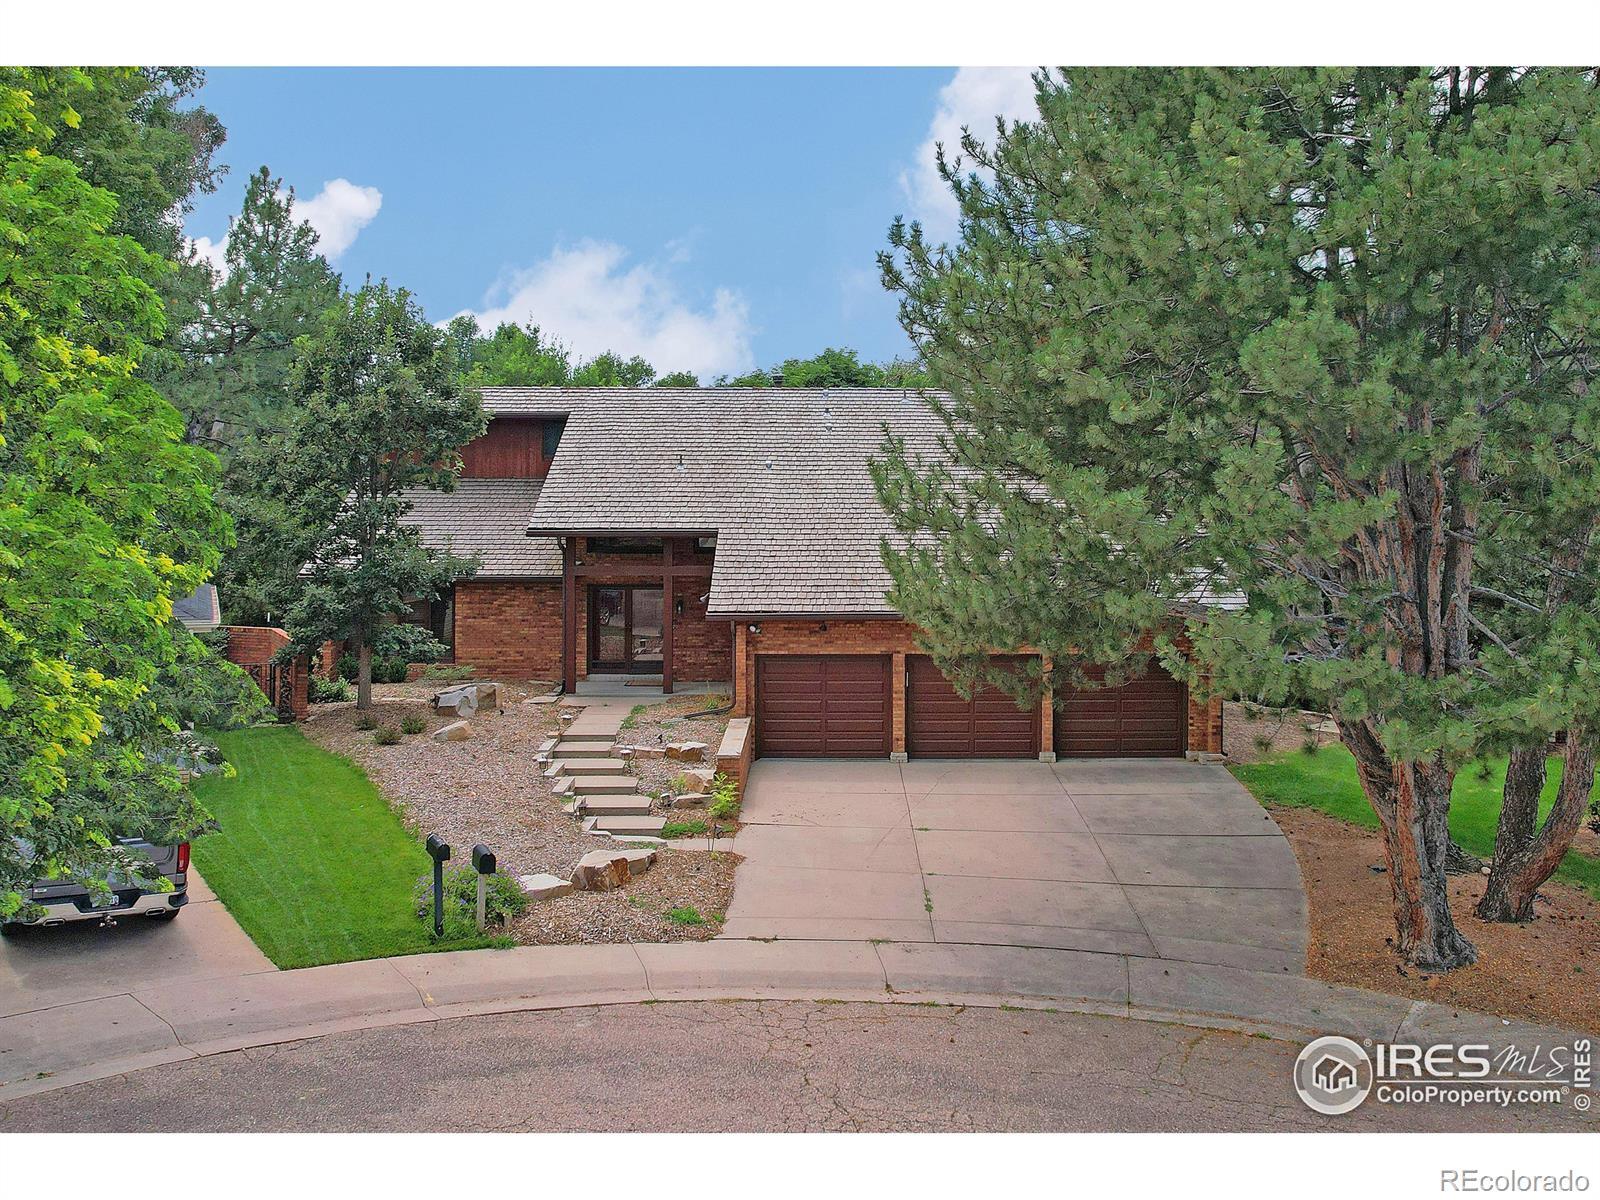 1715  37th avenue, greeley sold home. Closed on 2024-01-17 for $634,025.